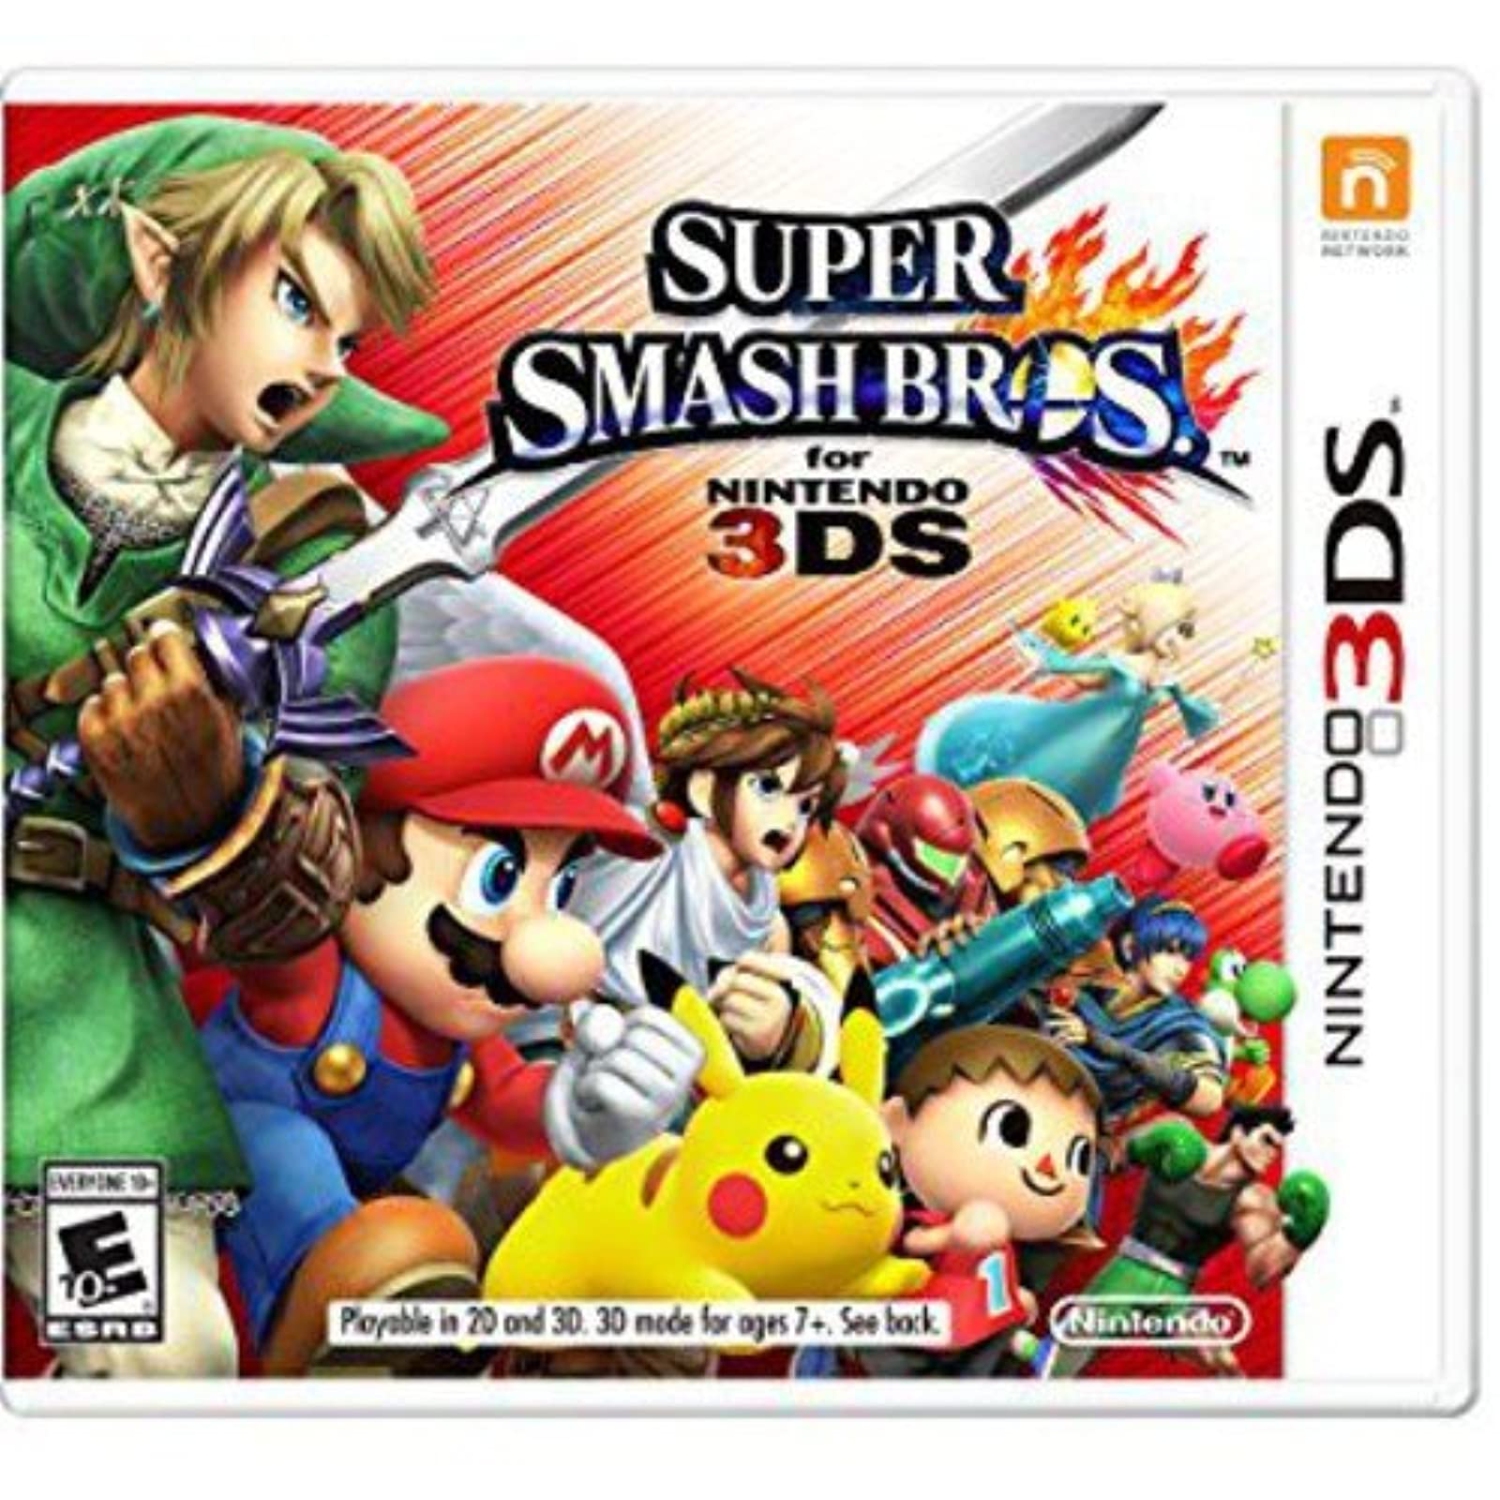 Previously Played - Super Smash Bros Nintendo For 3DS Fighting